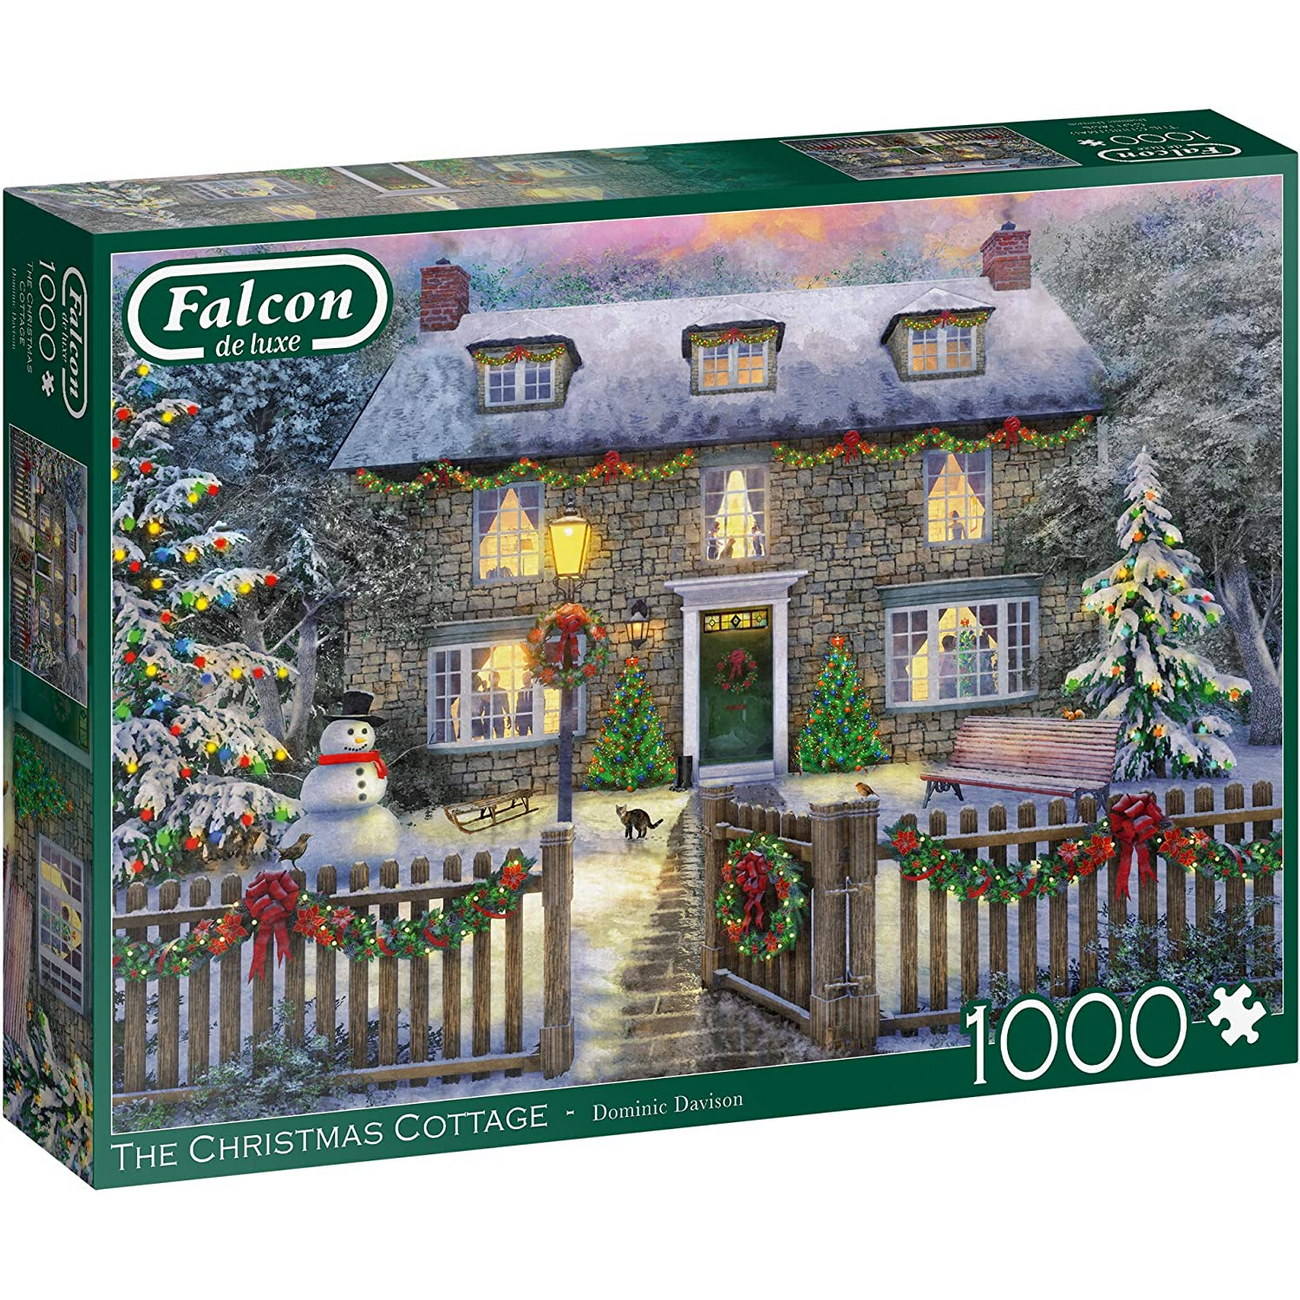 Puzzle - Weihnachtshaus - Christmas Cottage (Falcon de Luxe) - 1000 Teile